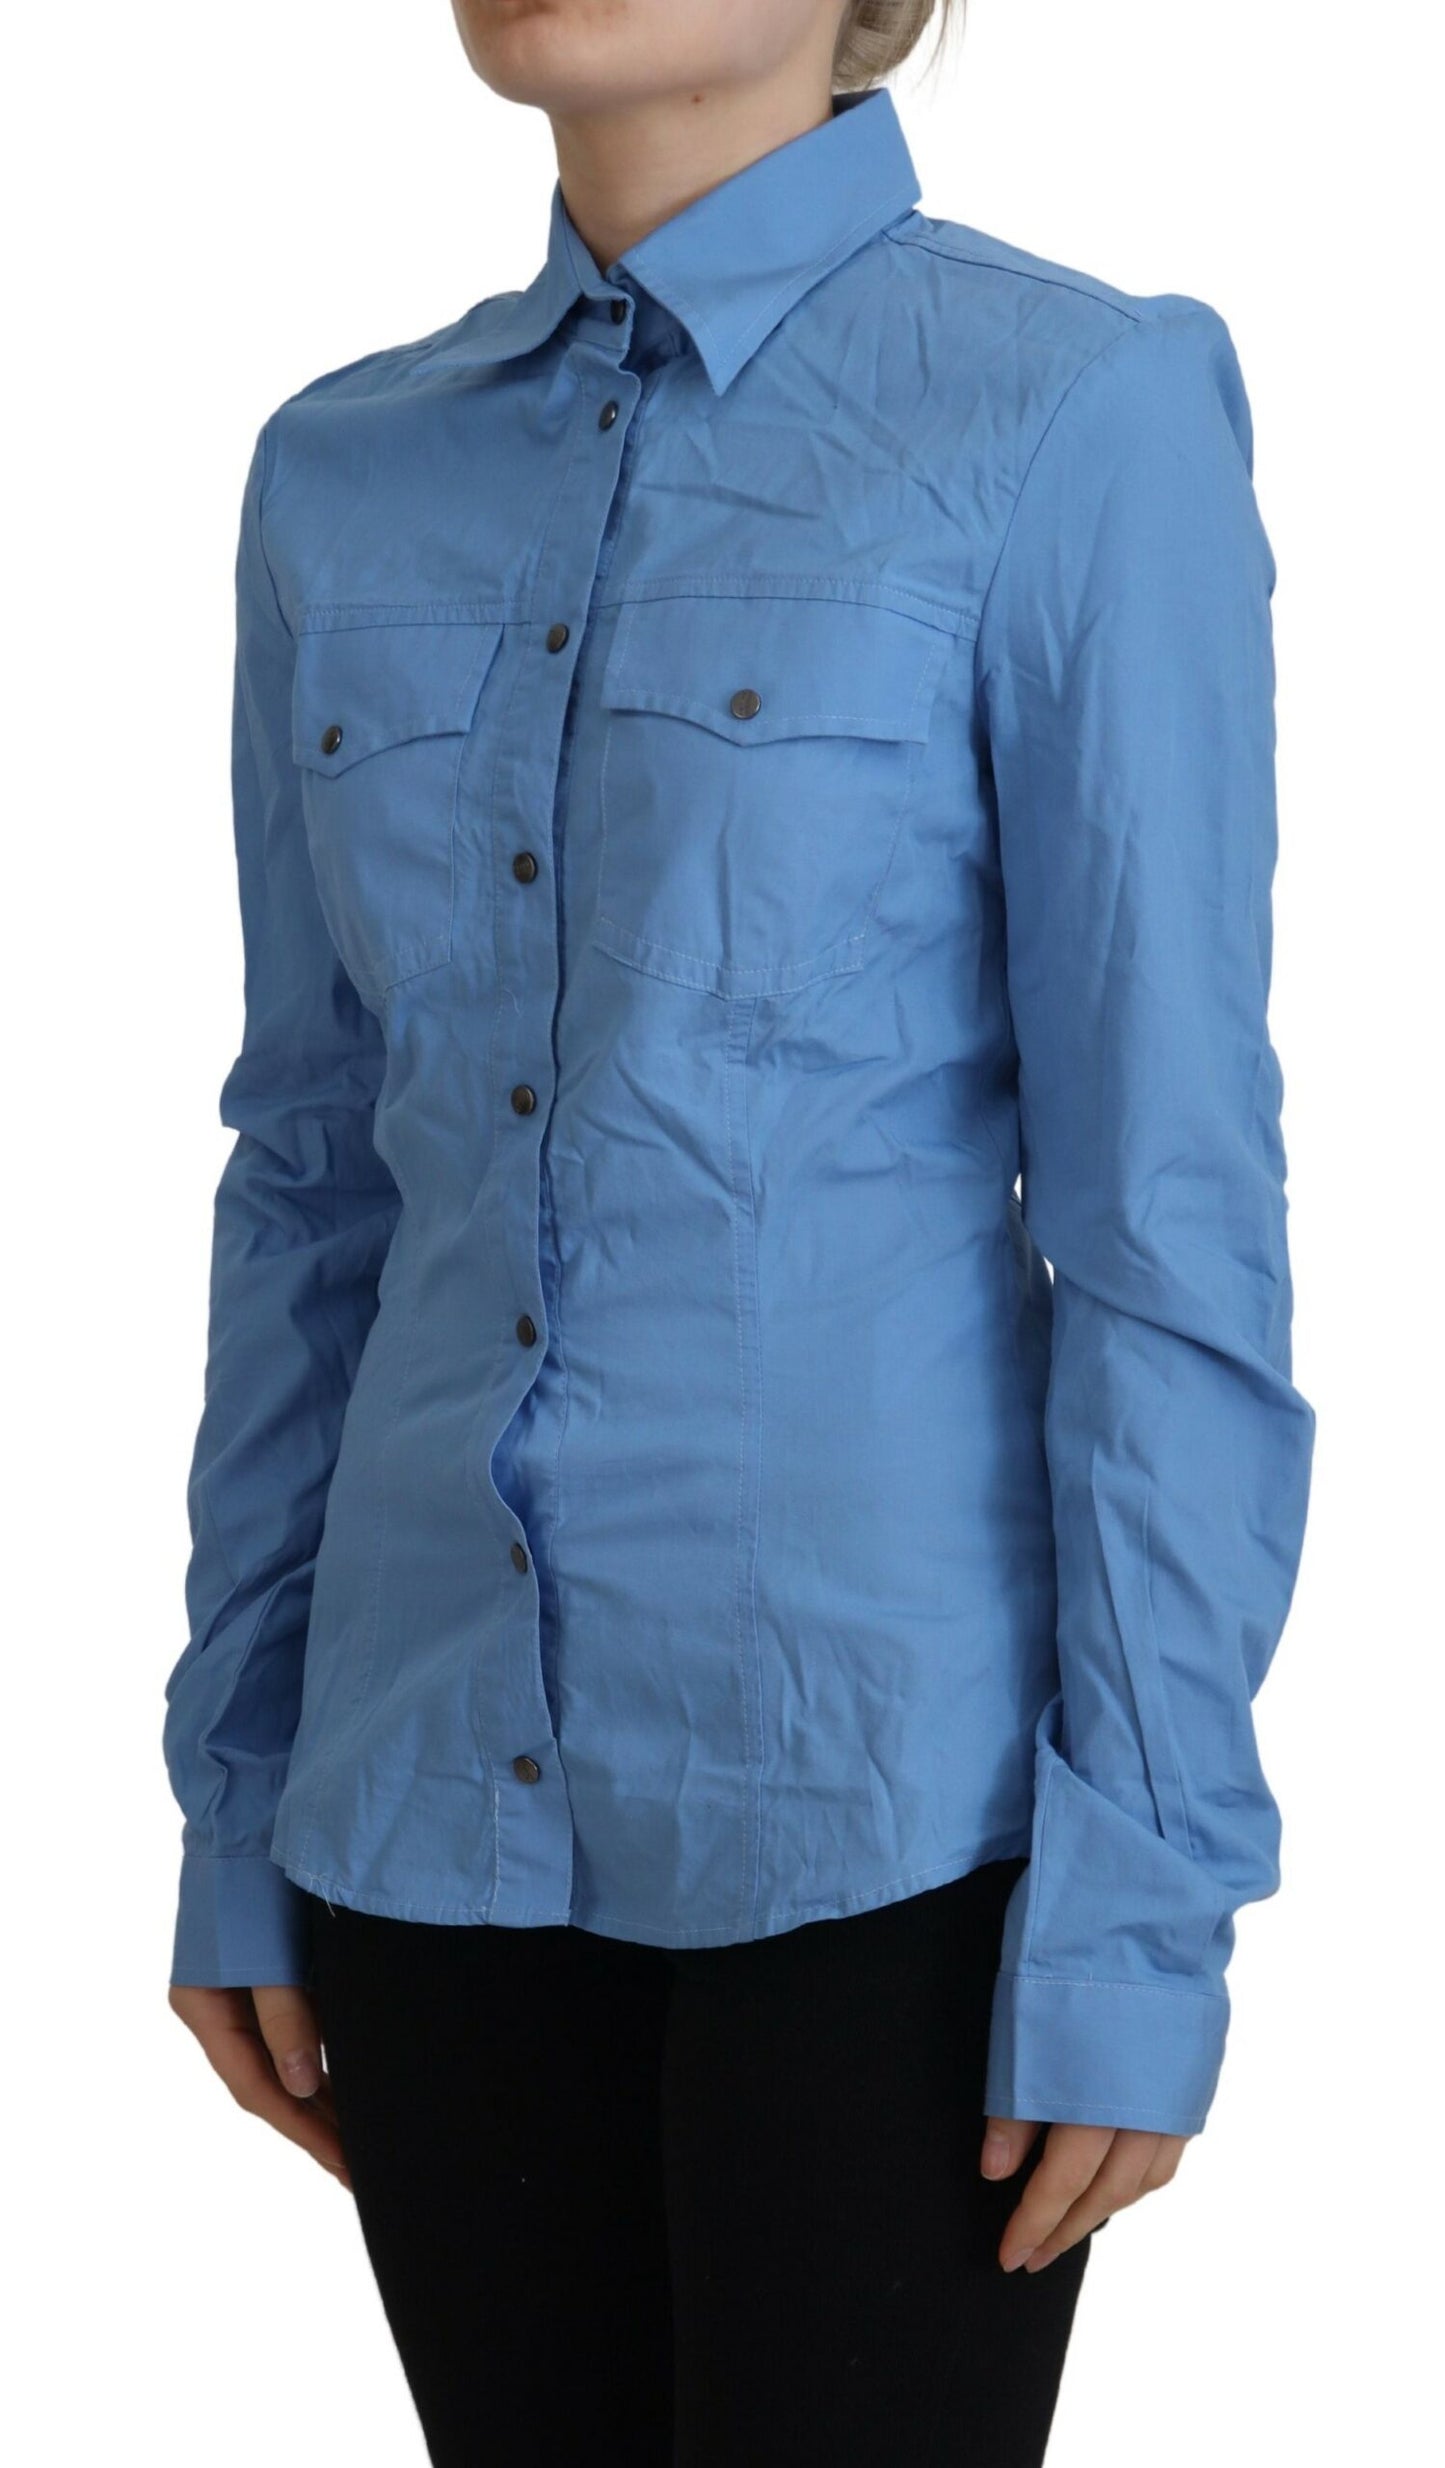 Ferre Blue Cotton Long Sleeves Collared Button Down Top